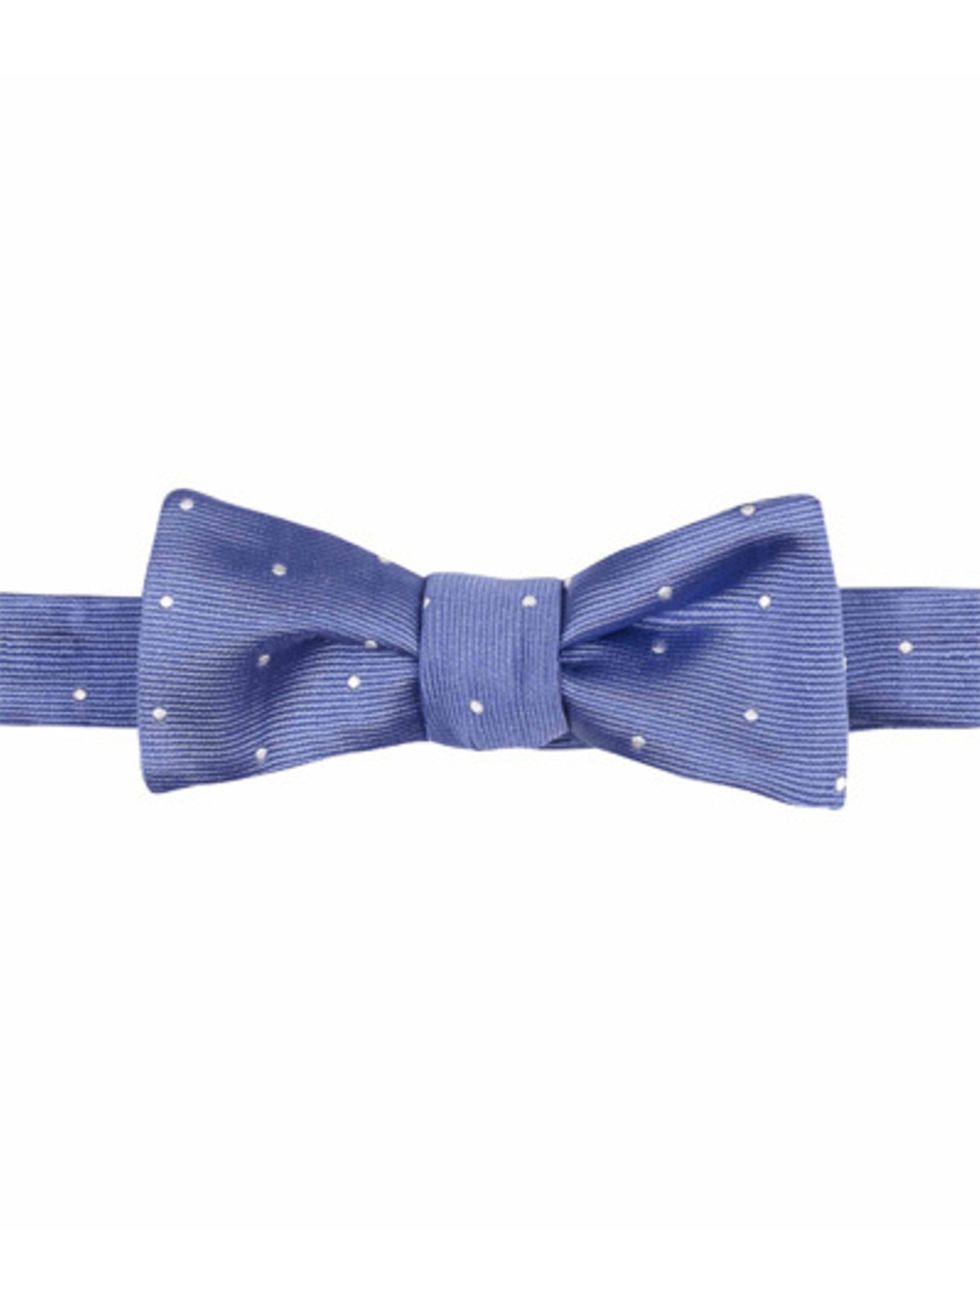 Product, Collar, Electric blue, Cobalt blue, Costume accessory, Strap, Ribbon, Bow tie, Webbing, Embellishment, 